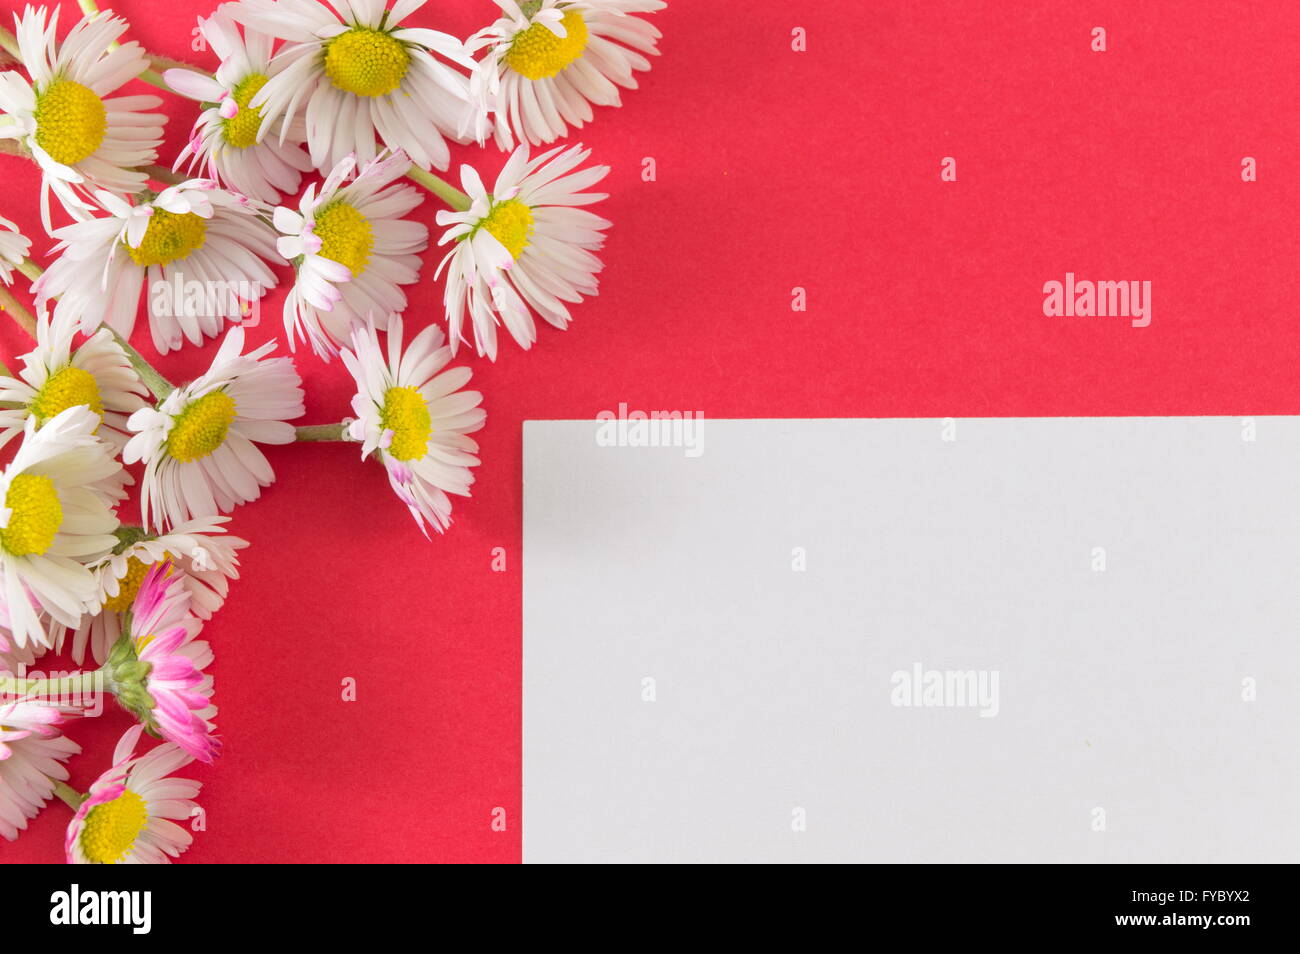 Chamomile flowers on red background Stock Photo